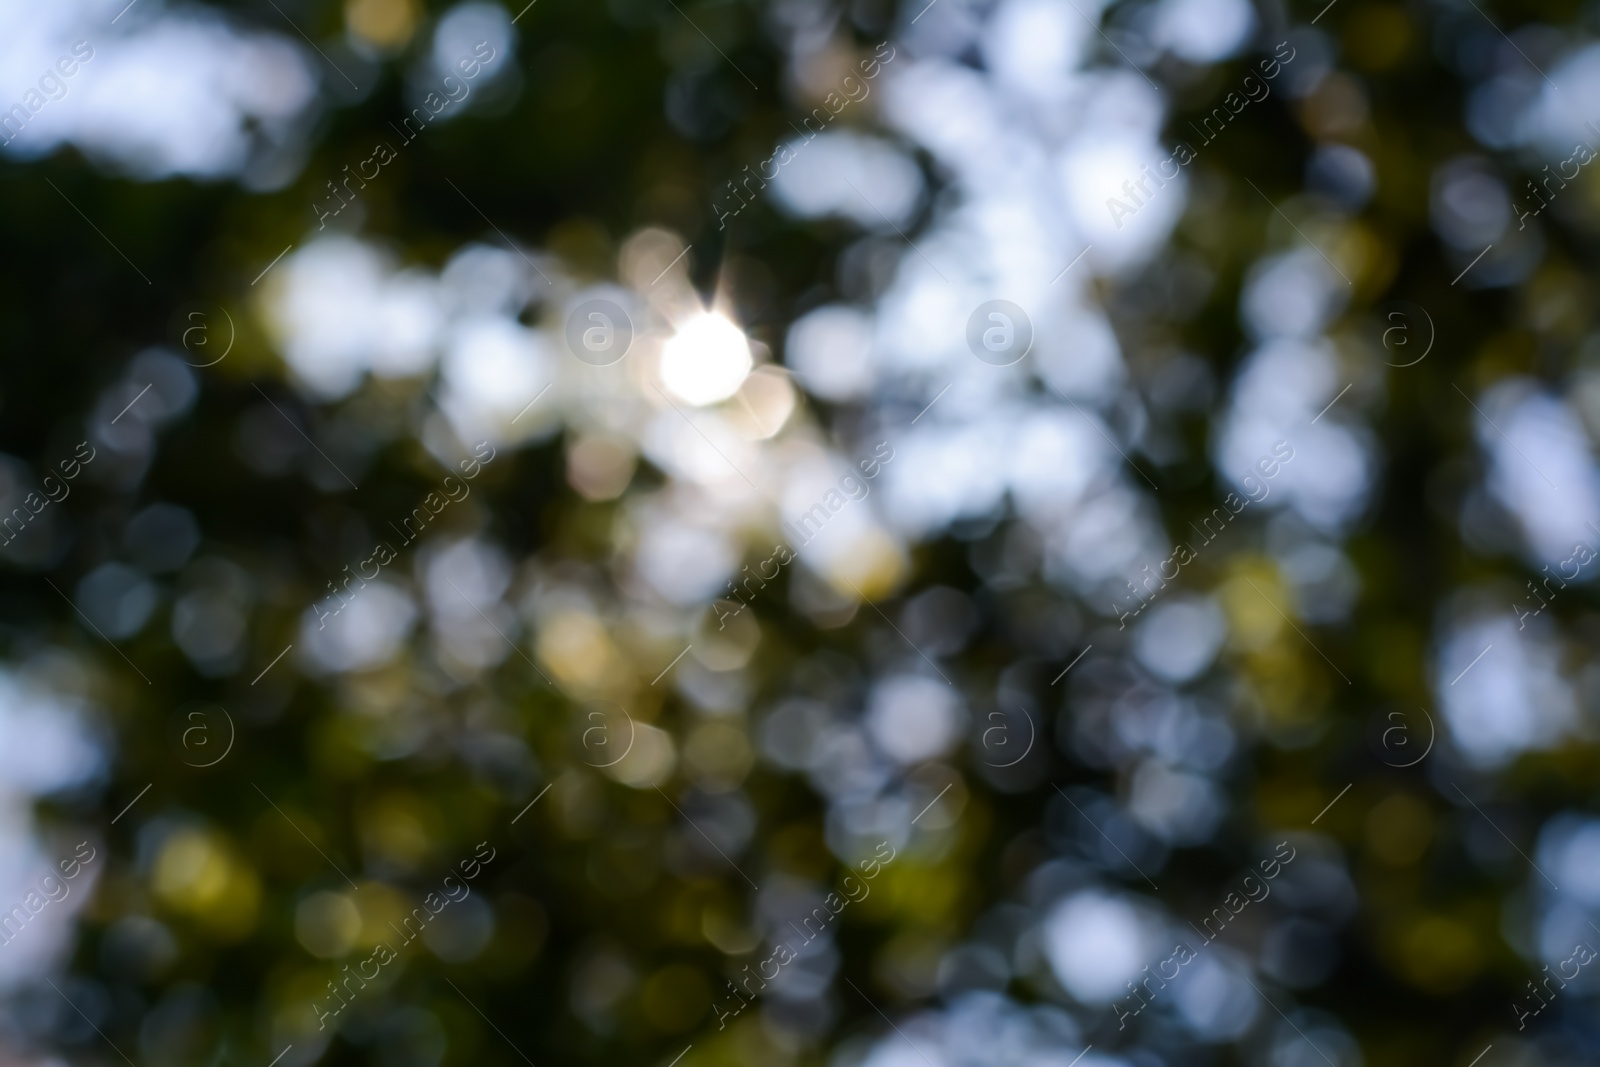 Photo of Blurred view of green tree outdoors. Bokeh effect